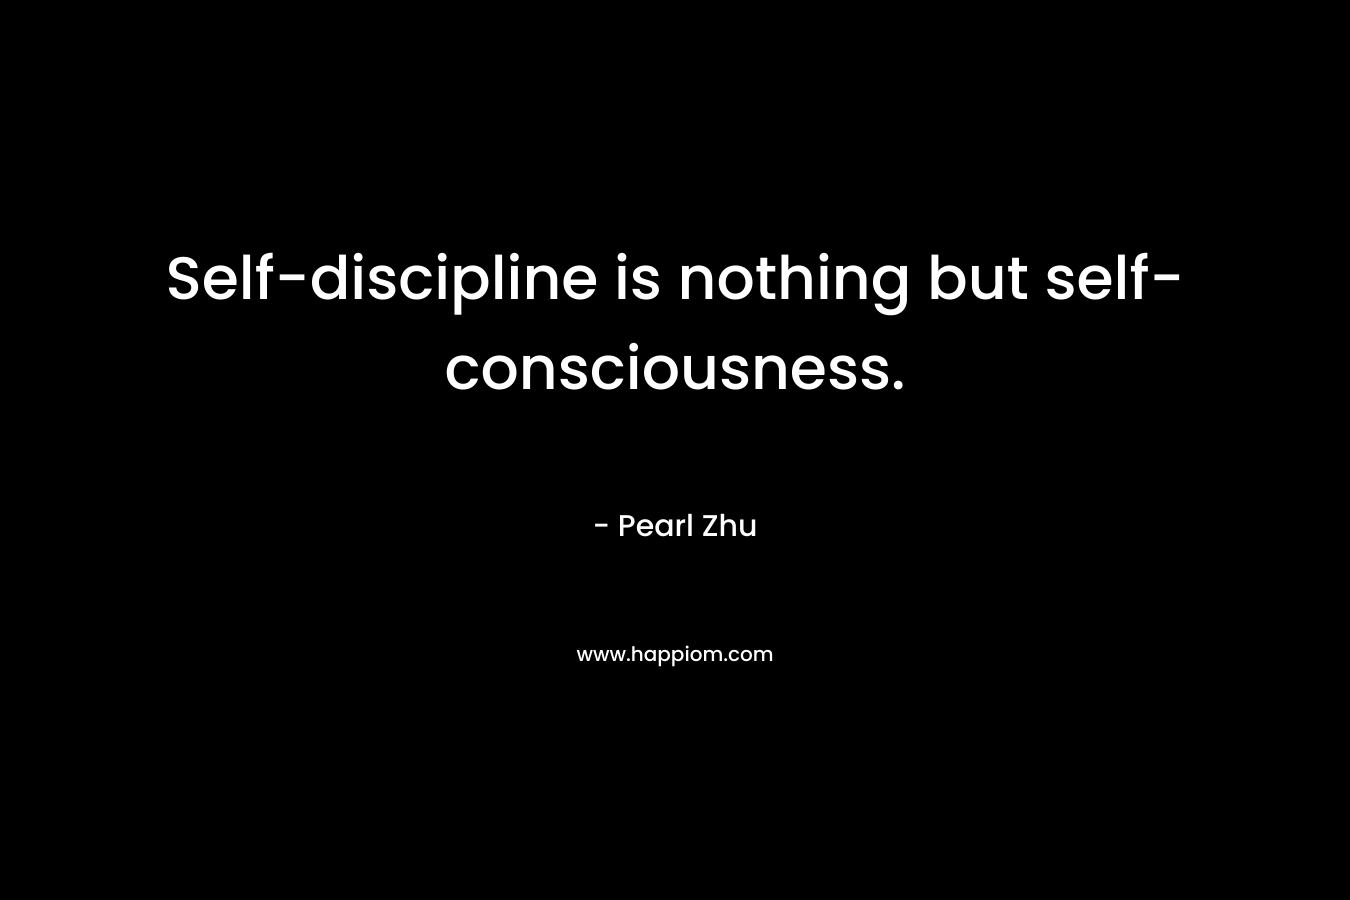 Self-discipline is nothing but self-consciousness. – Pearl Zhu